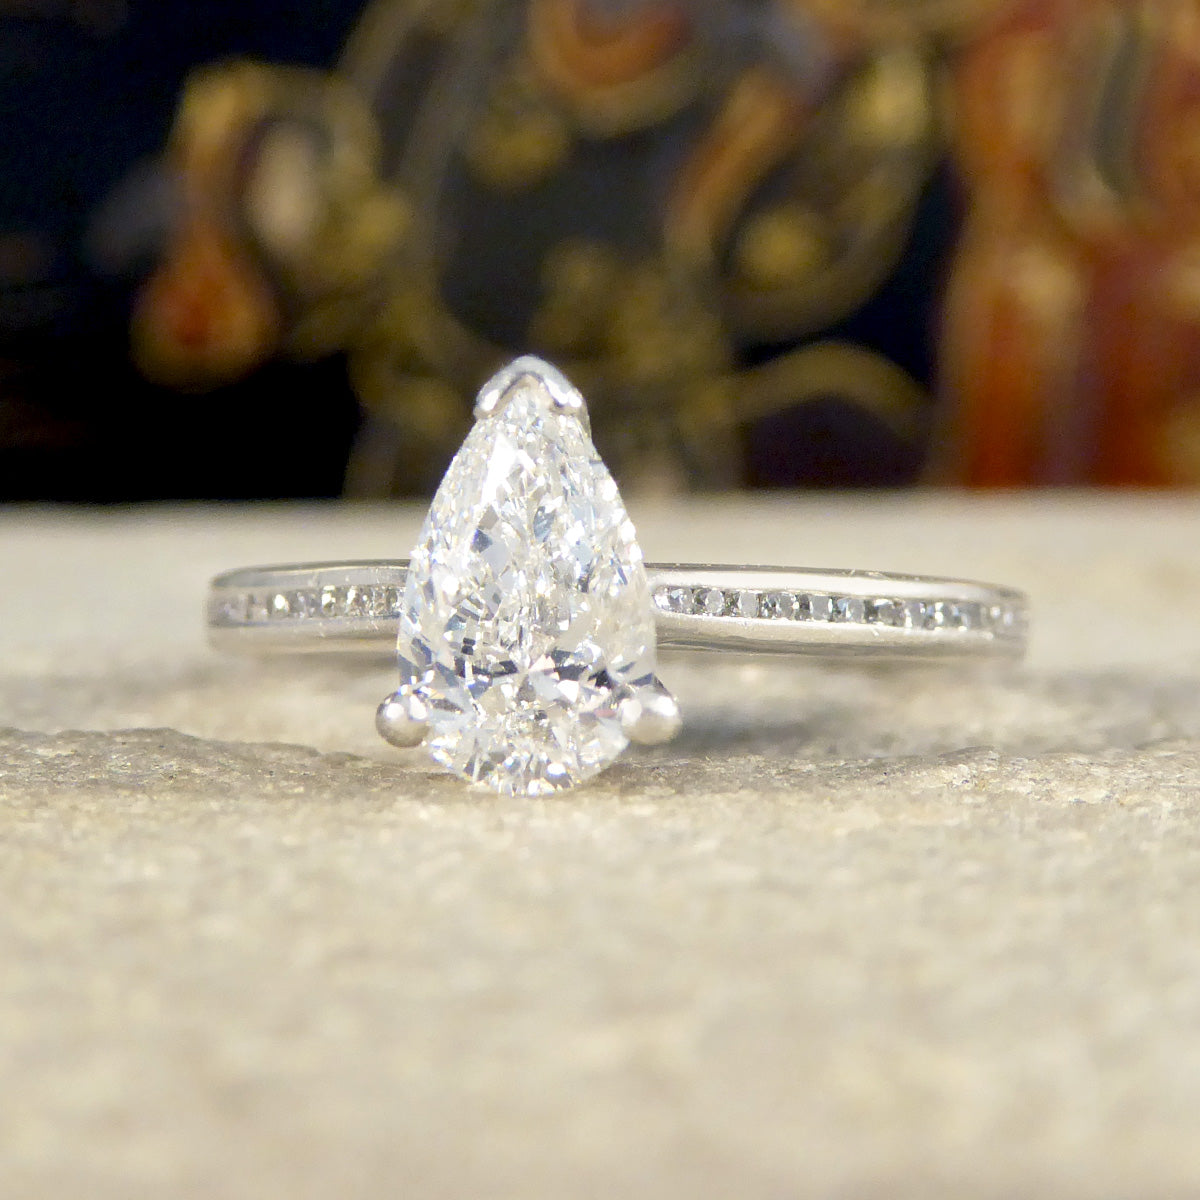 GIA Cert Pear Cut Diamond Engagement Ring with Diamond Shoulder in Platinum